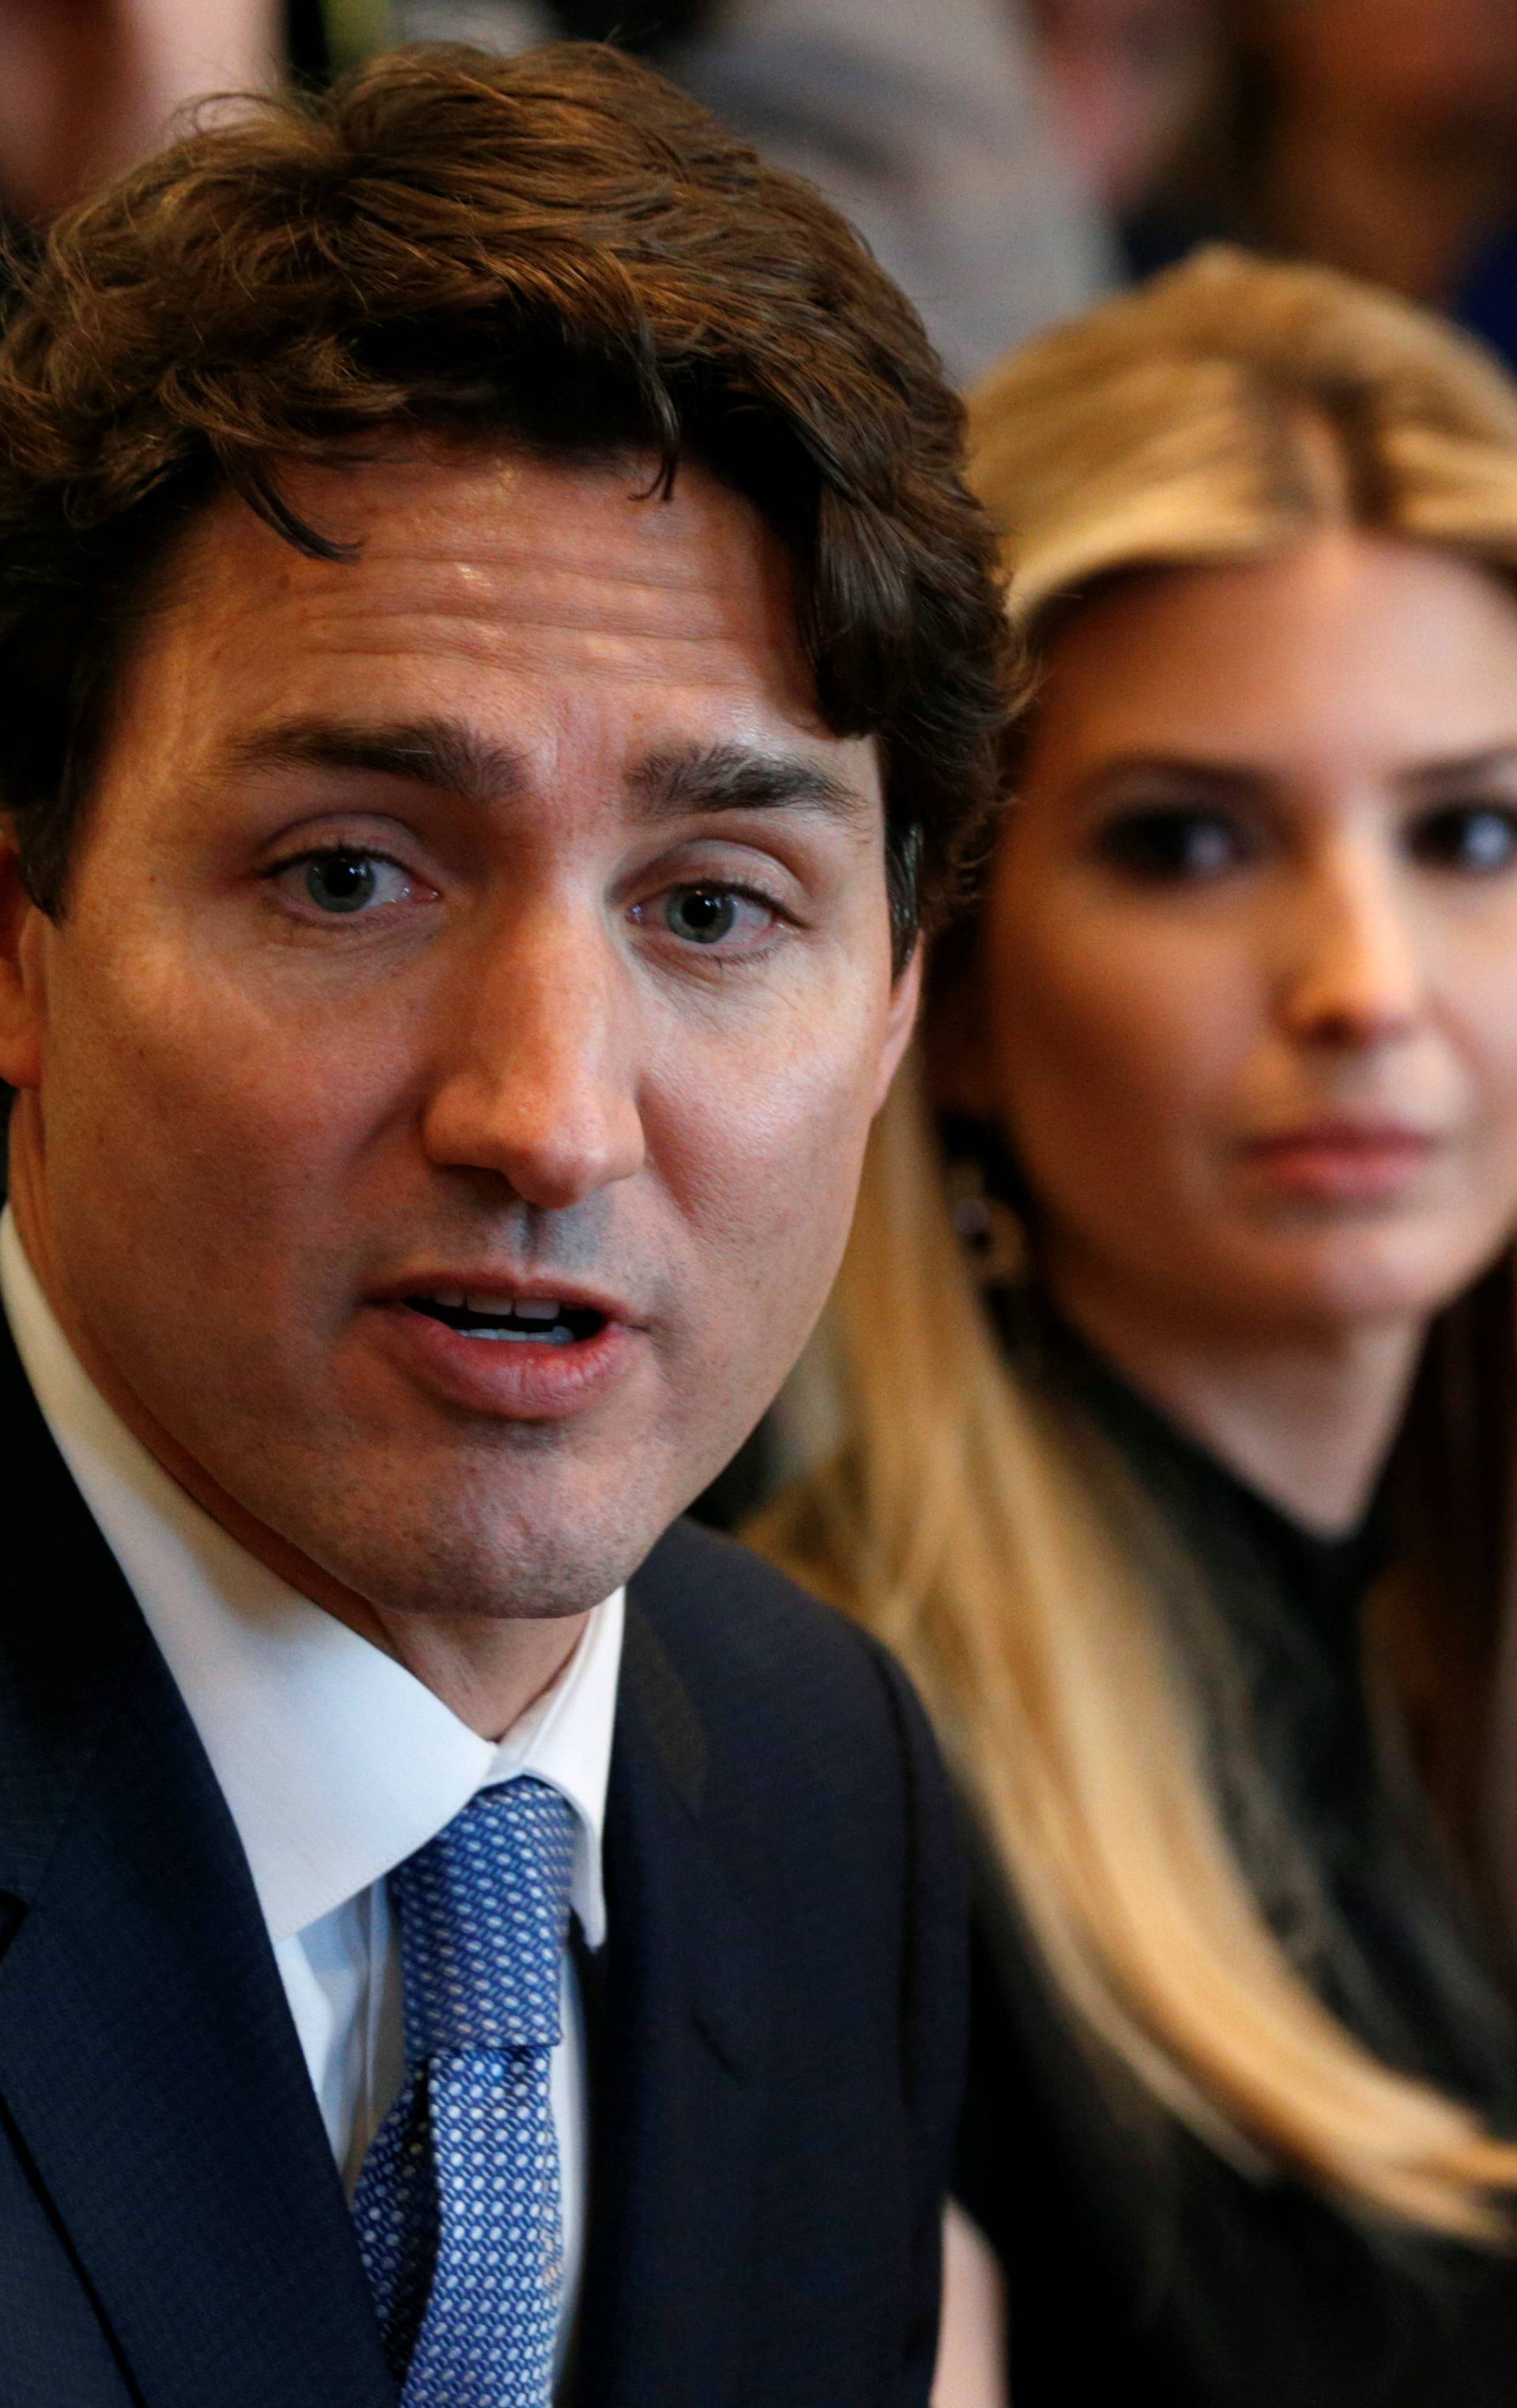 Ivanka Trump looks toward Canadian Prime Minister Justin Trudeau during U.S. President Donald Trump's roundtable discussion on the advancement of women entrepreneurs and business leaders at the White House in Washington